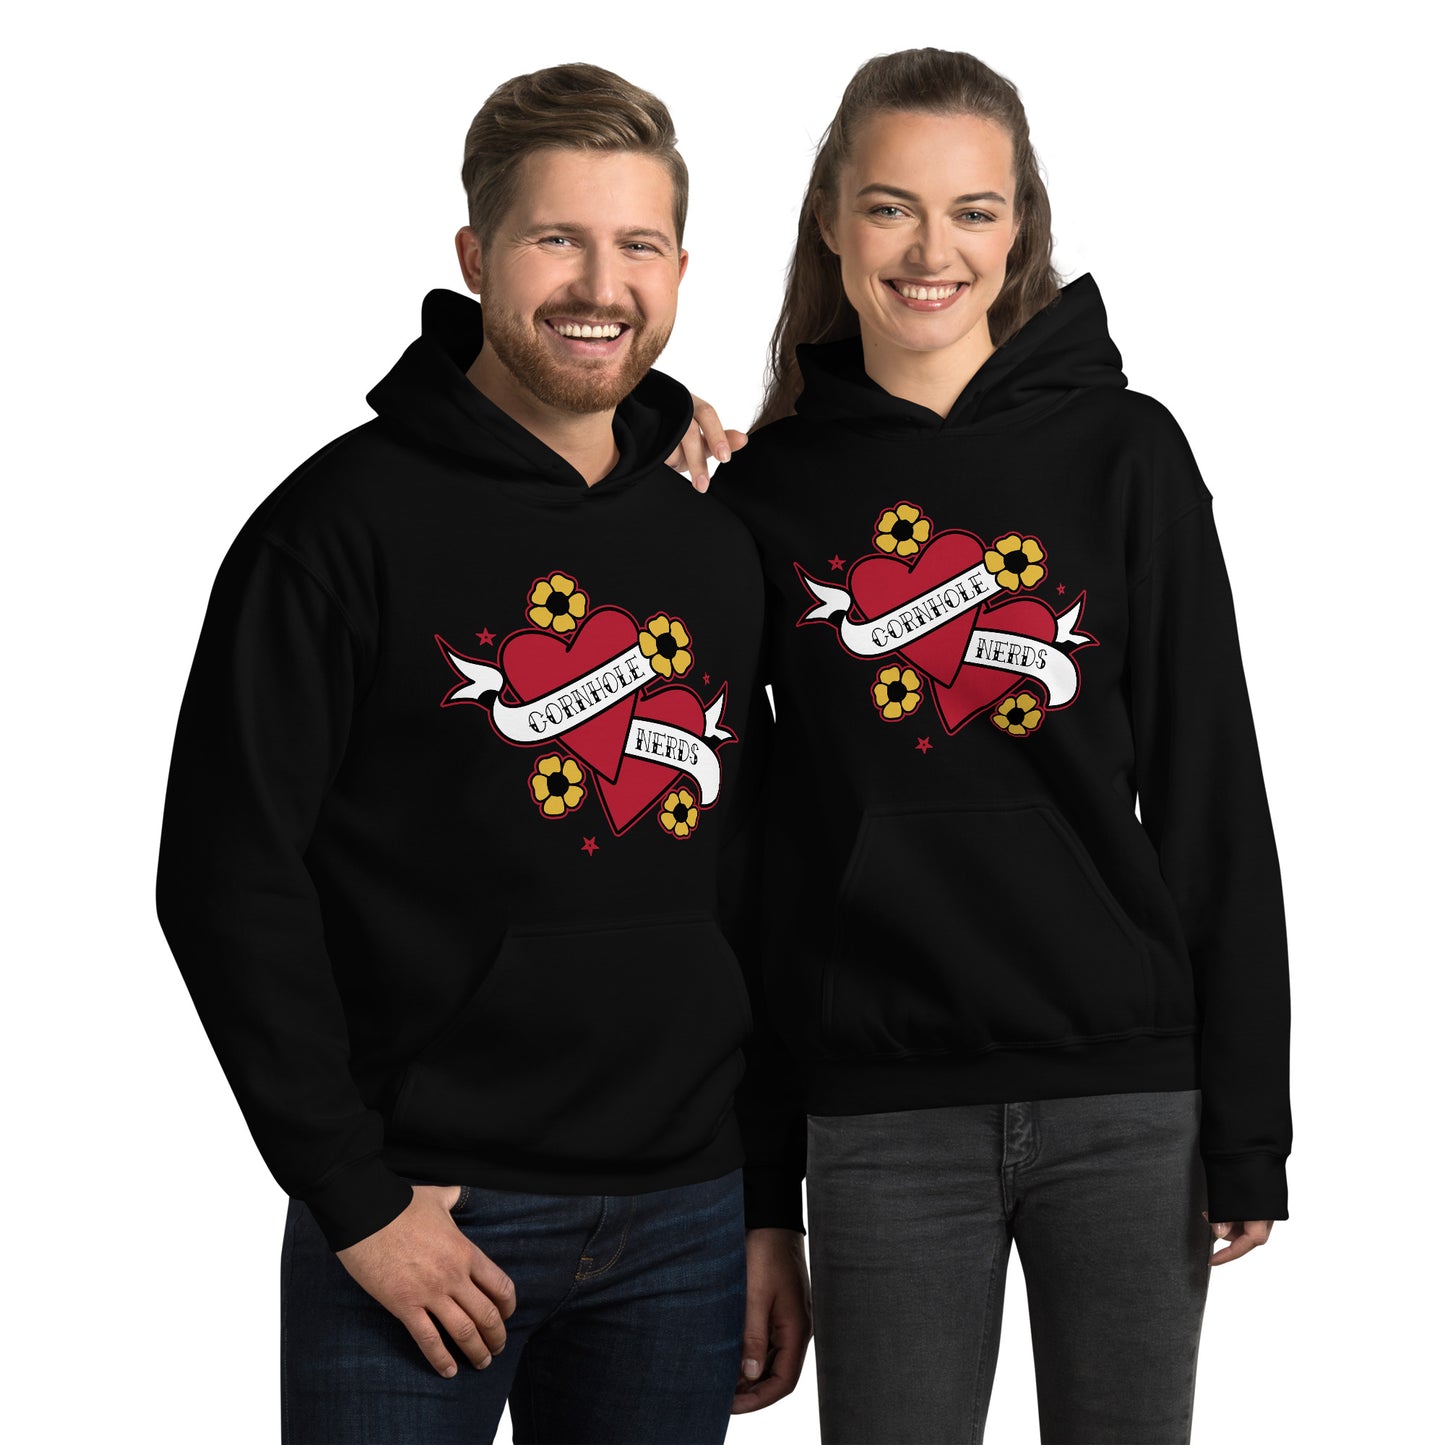 Cornhole Nerds two hearts are better than one Unisex Hoodie